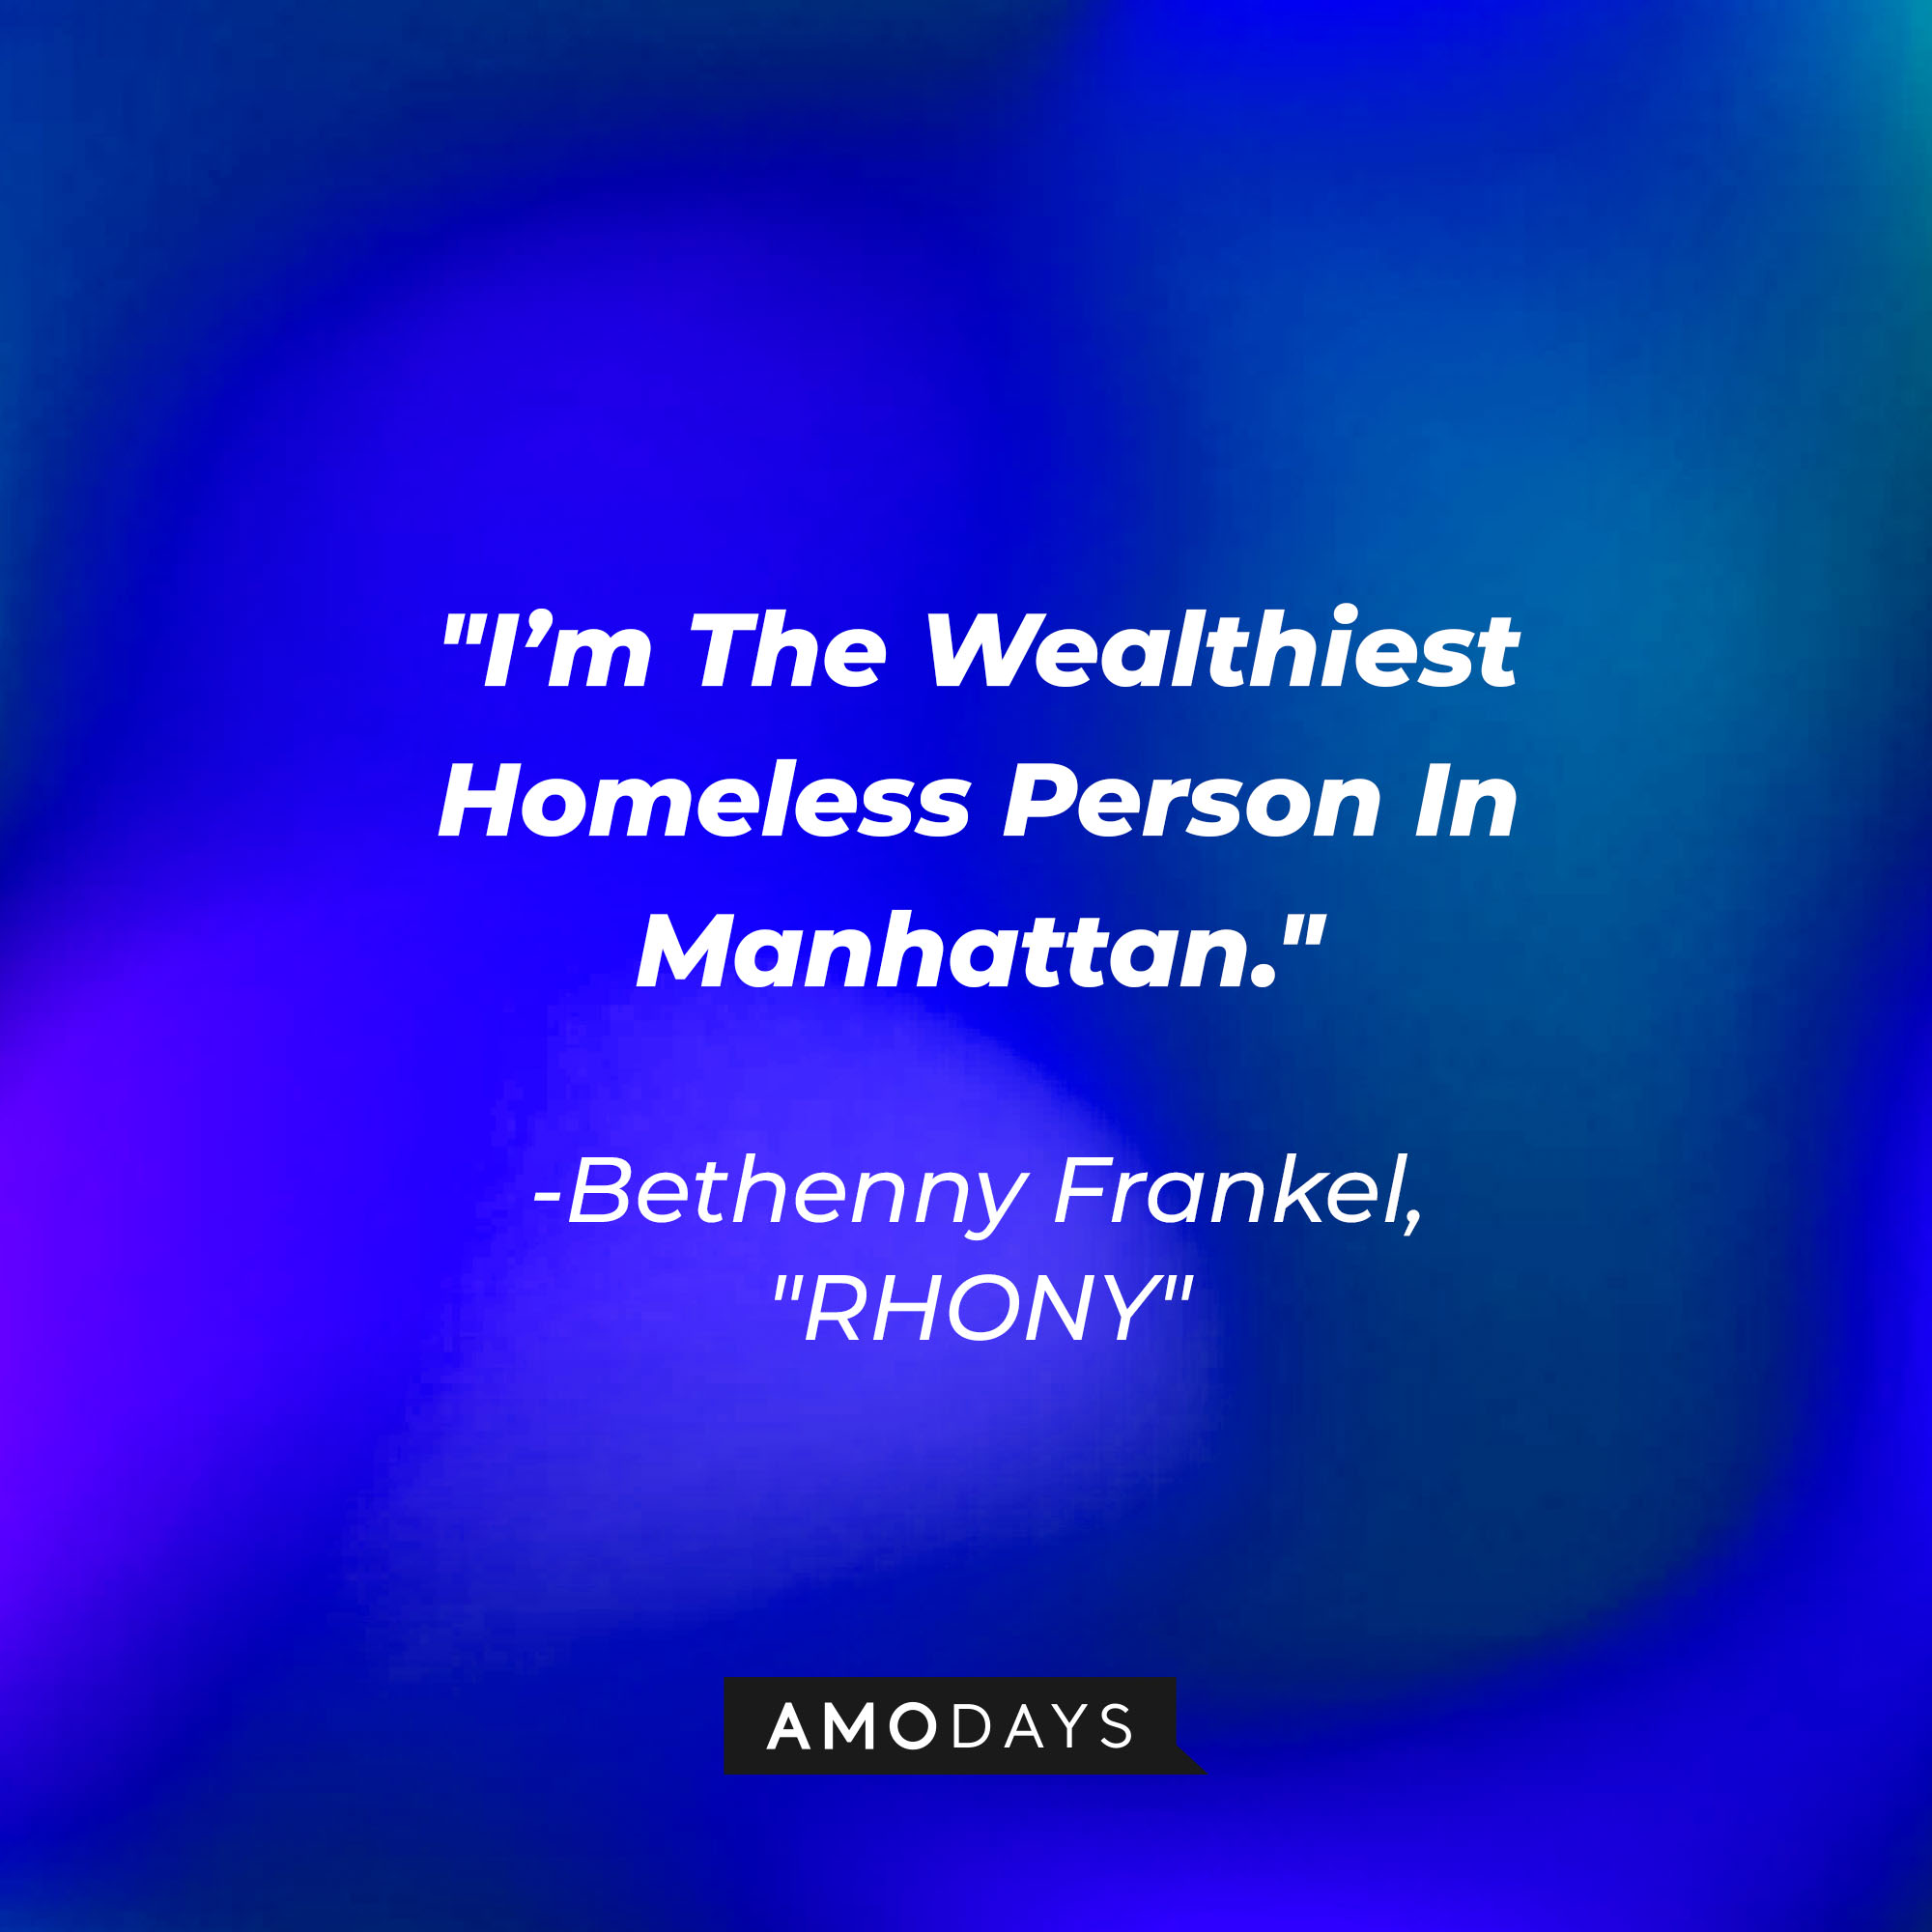 Bethenny Frankel's quote: "I'm The Wealthiest Homeless Person in Manhattan" | Source: Amodays